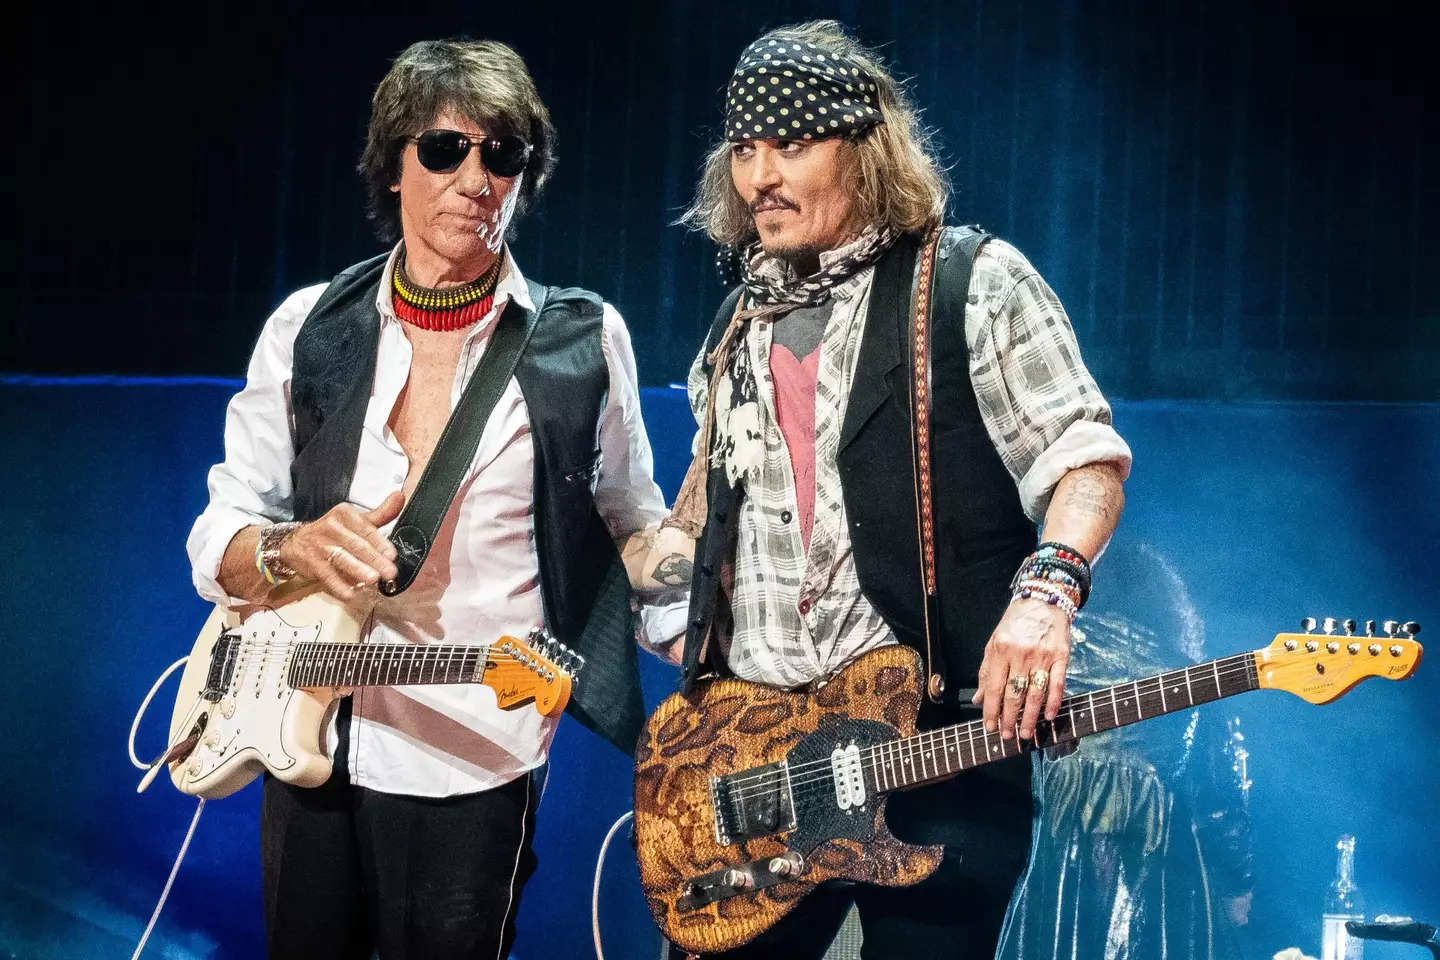 Depp is currently on tour with Jeff Beck.